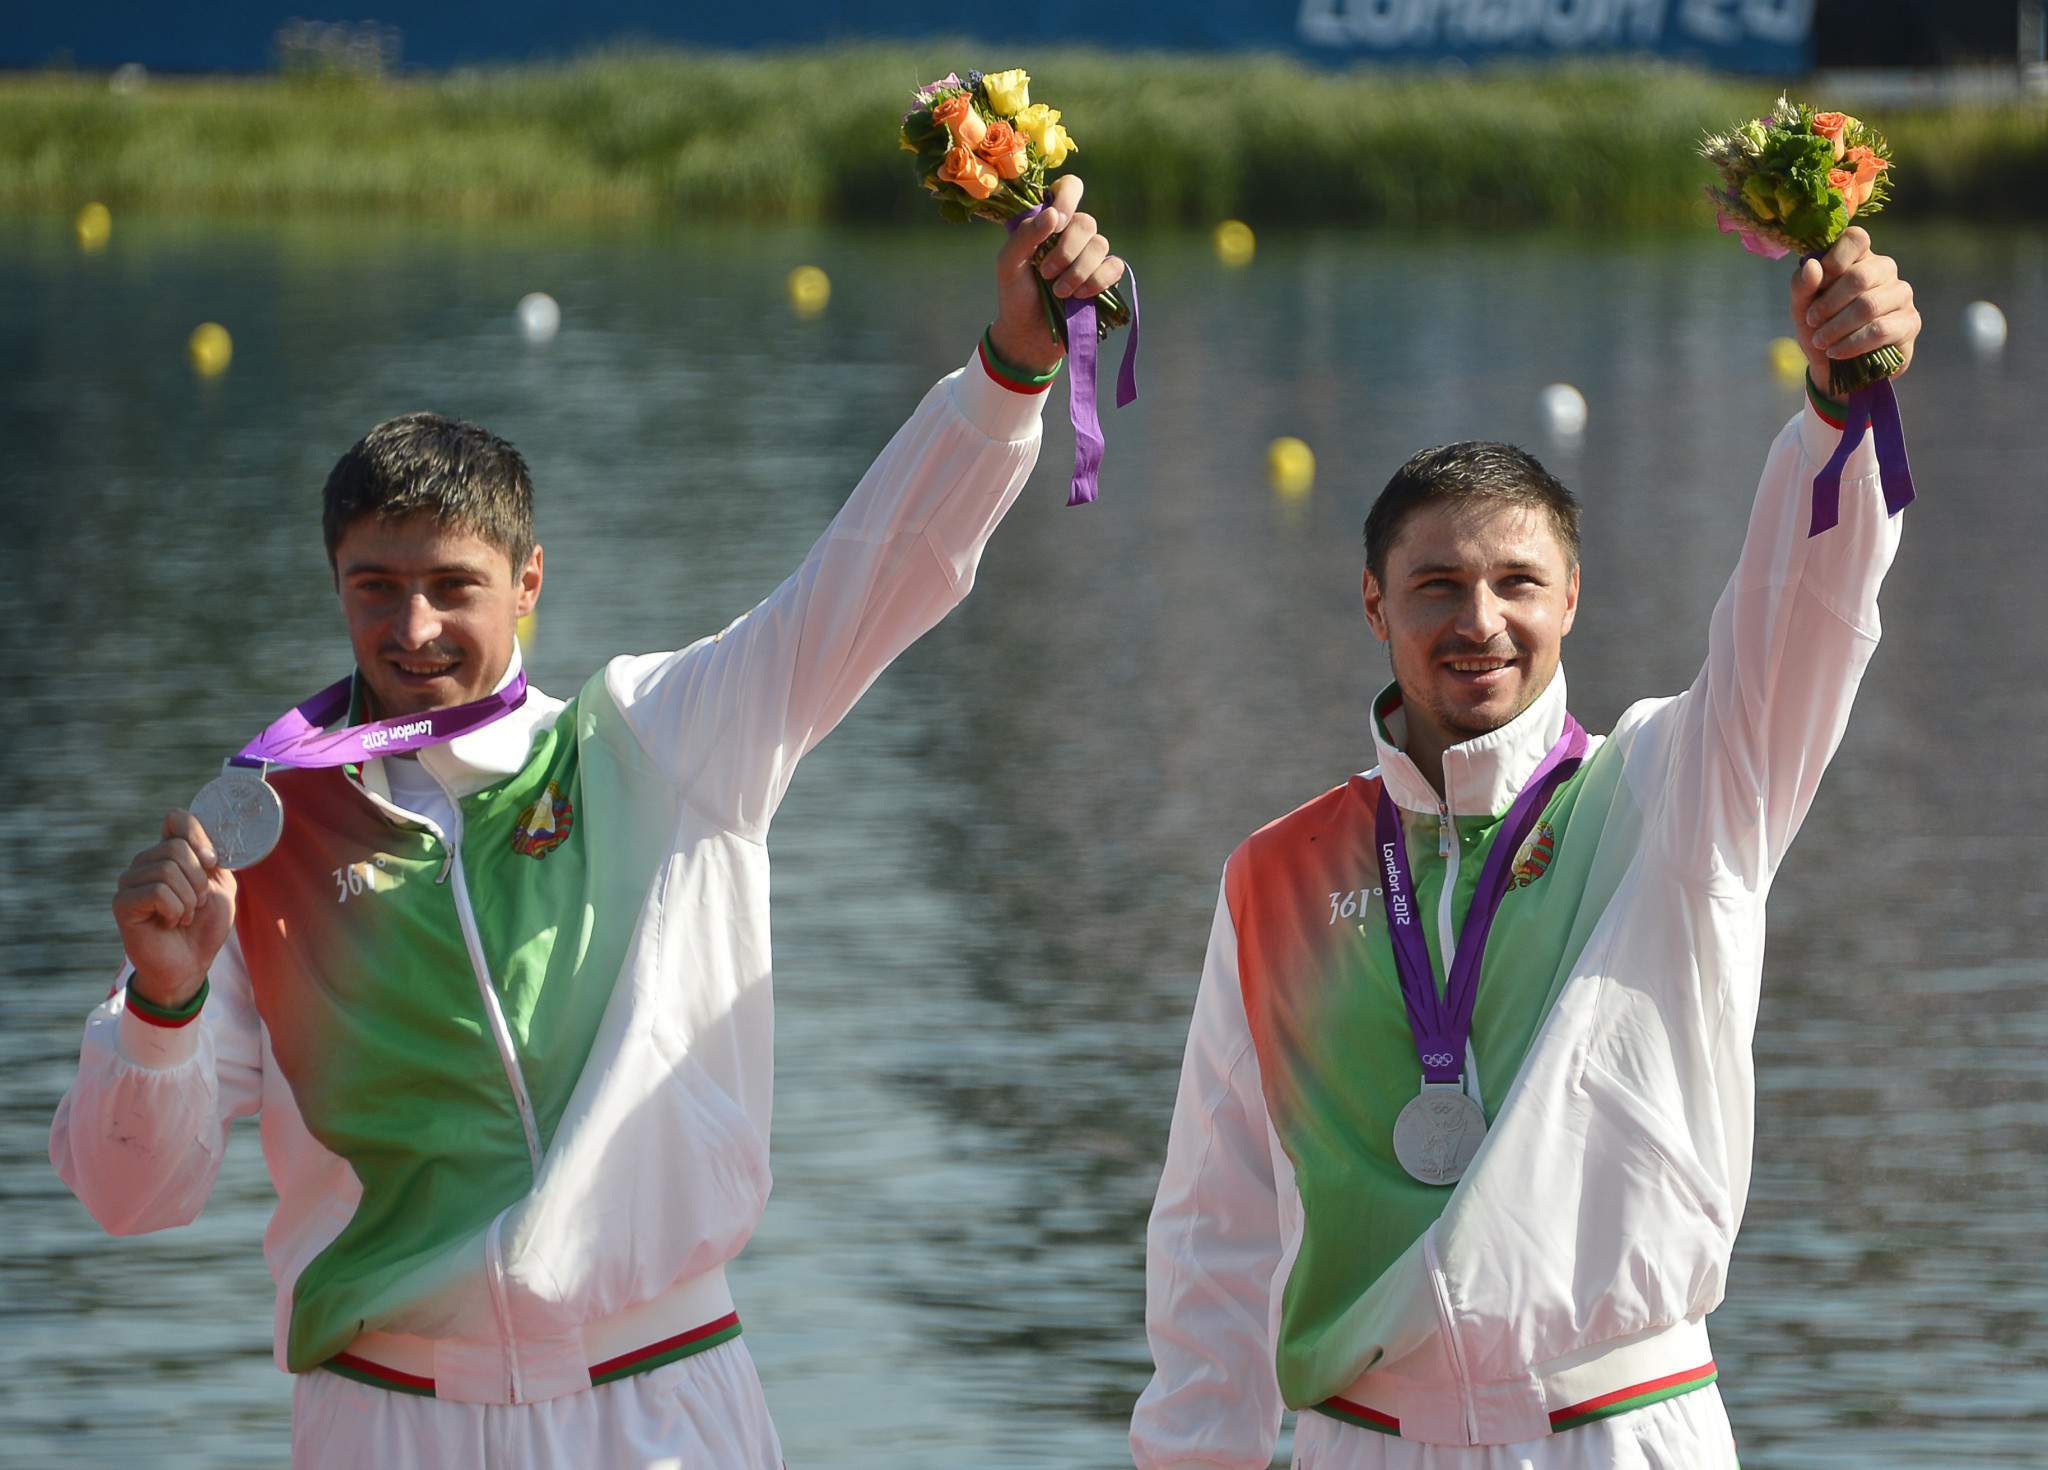 As well as gold at the 2008 Beijing Olympics, Aliaksandr Bahdanovich, right, won silver at London 2012 alongside Andrei Bahdanovich ©Getty Images